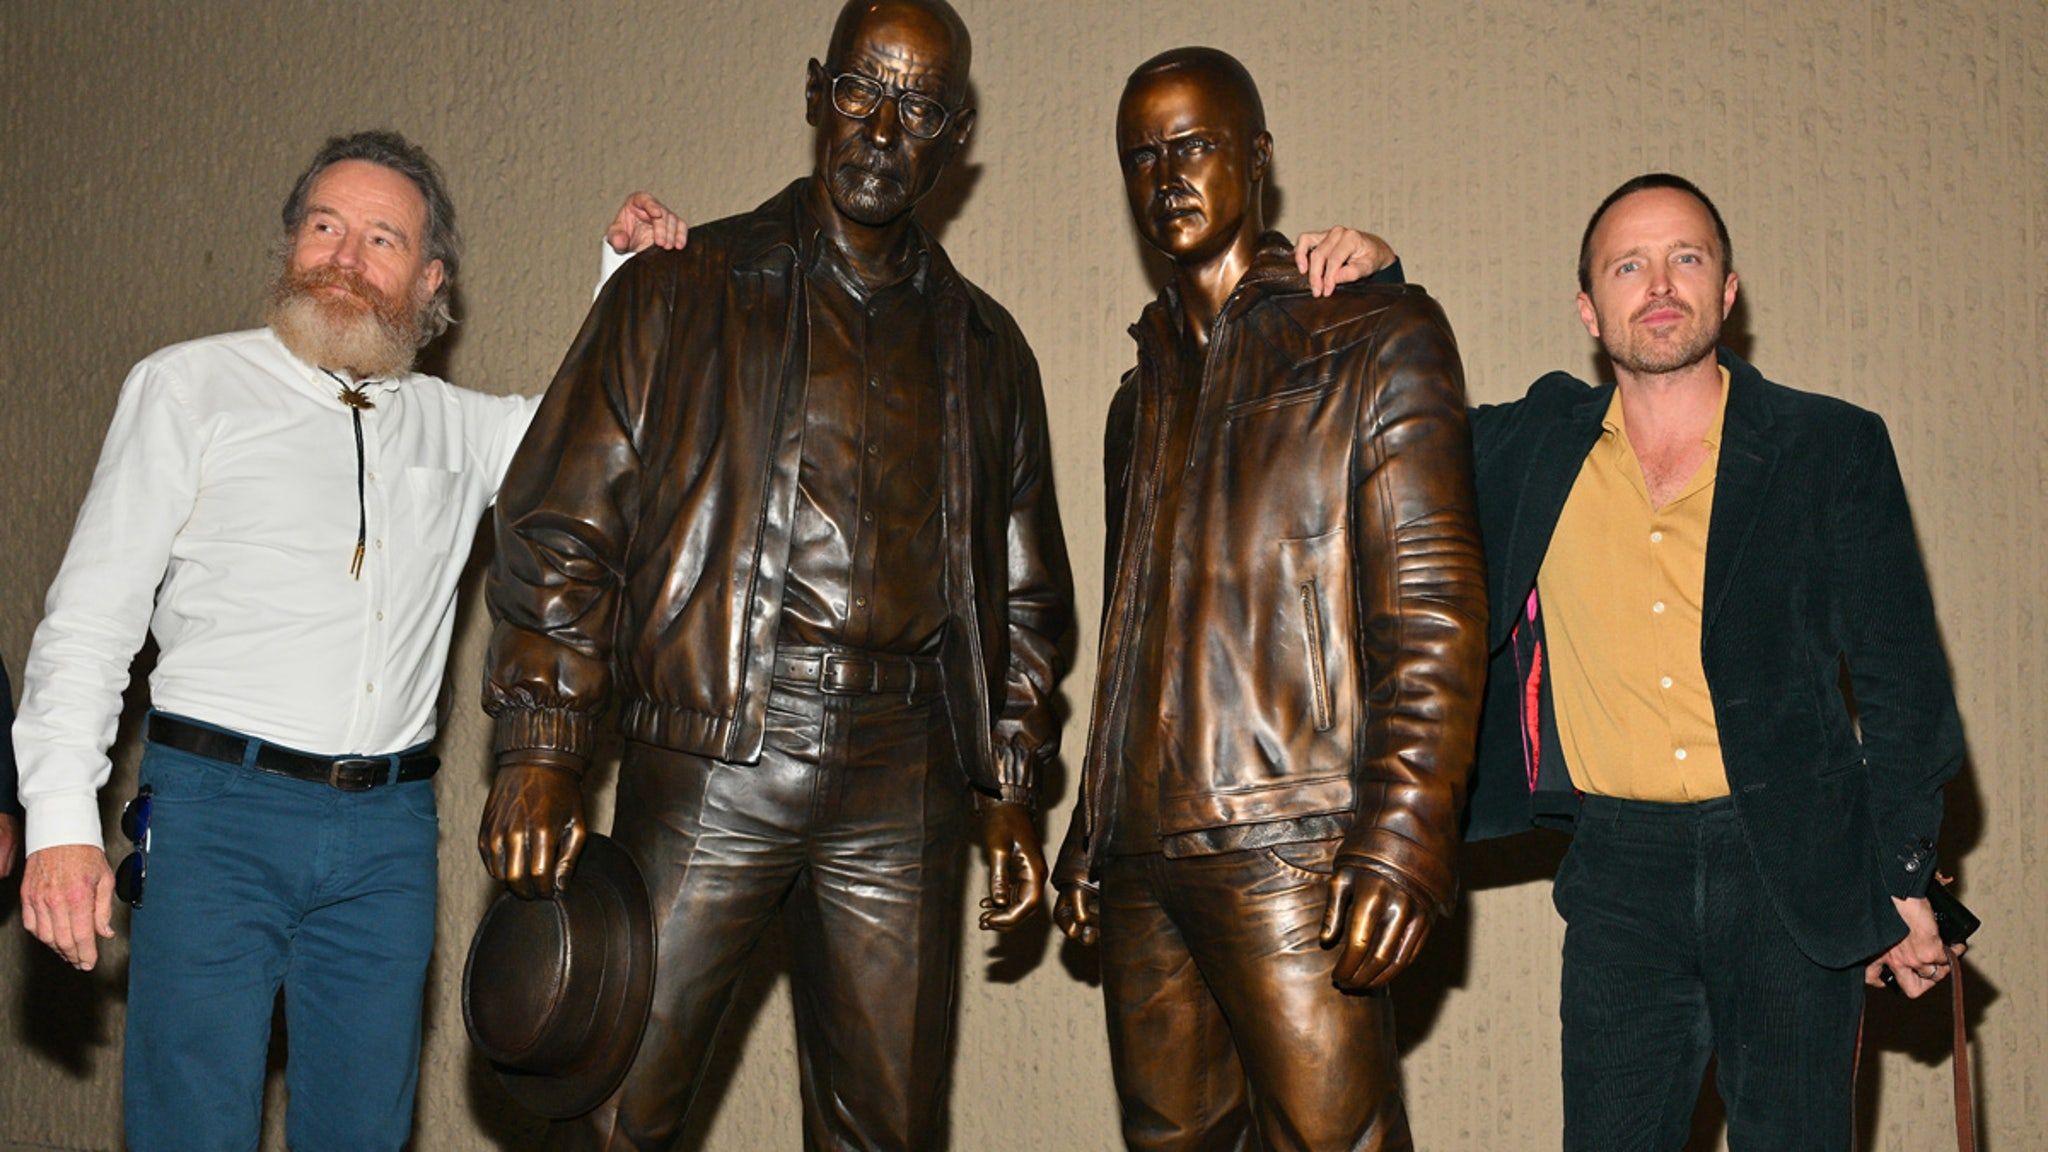 New Mexico Breaking Bad statues are making Republicans furious: Here’s why